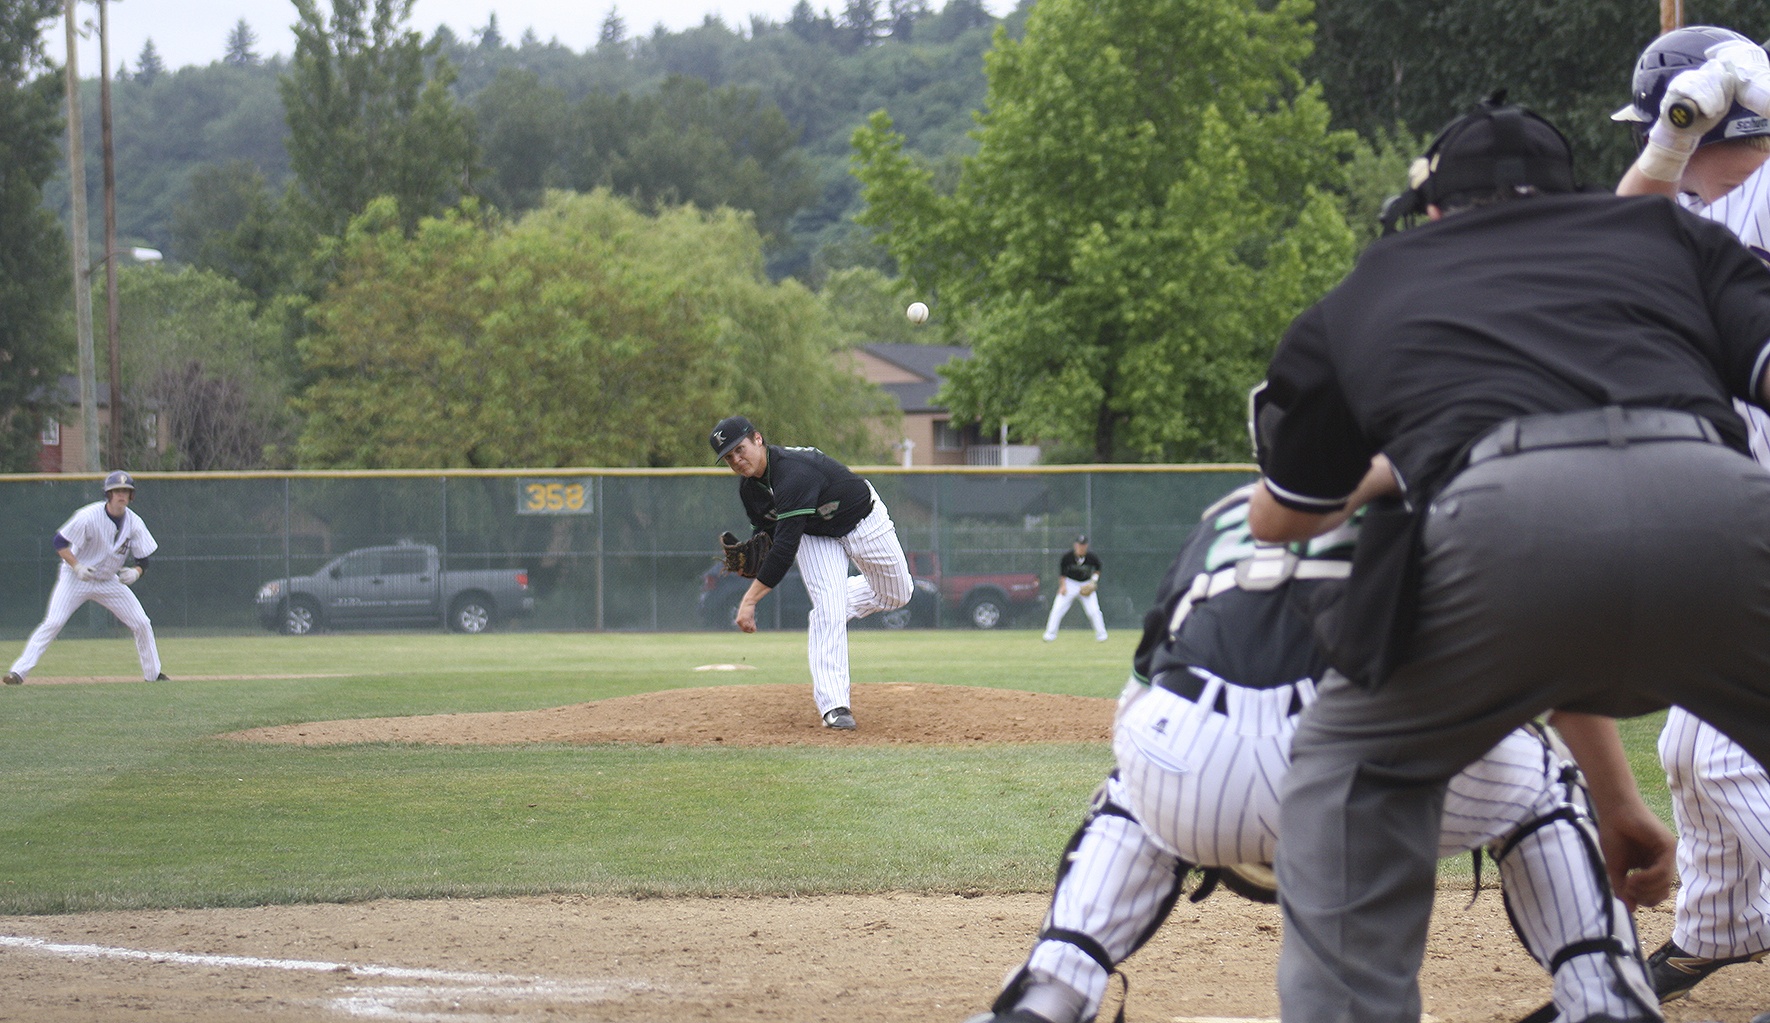 Kentwood junior Dominic Agron pitches during the Conks’ 6-2 loss to Puyallup May 14. Despite the loss